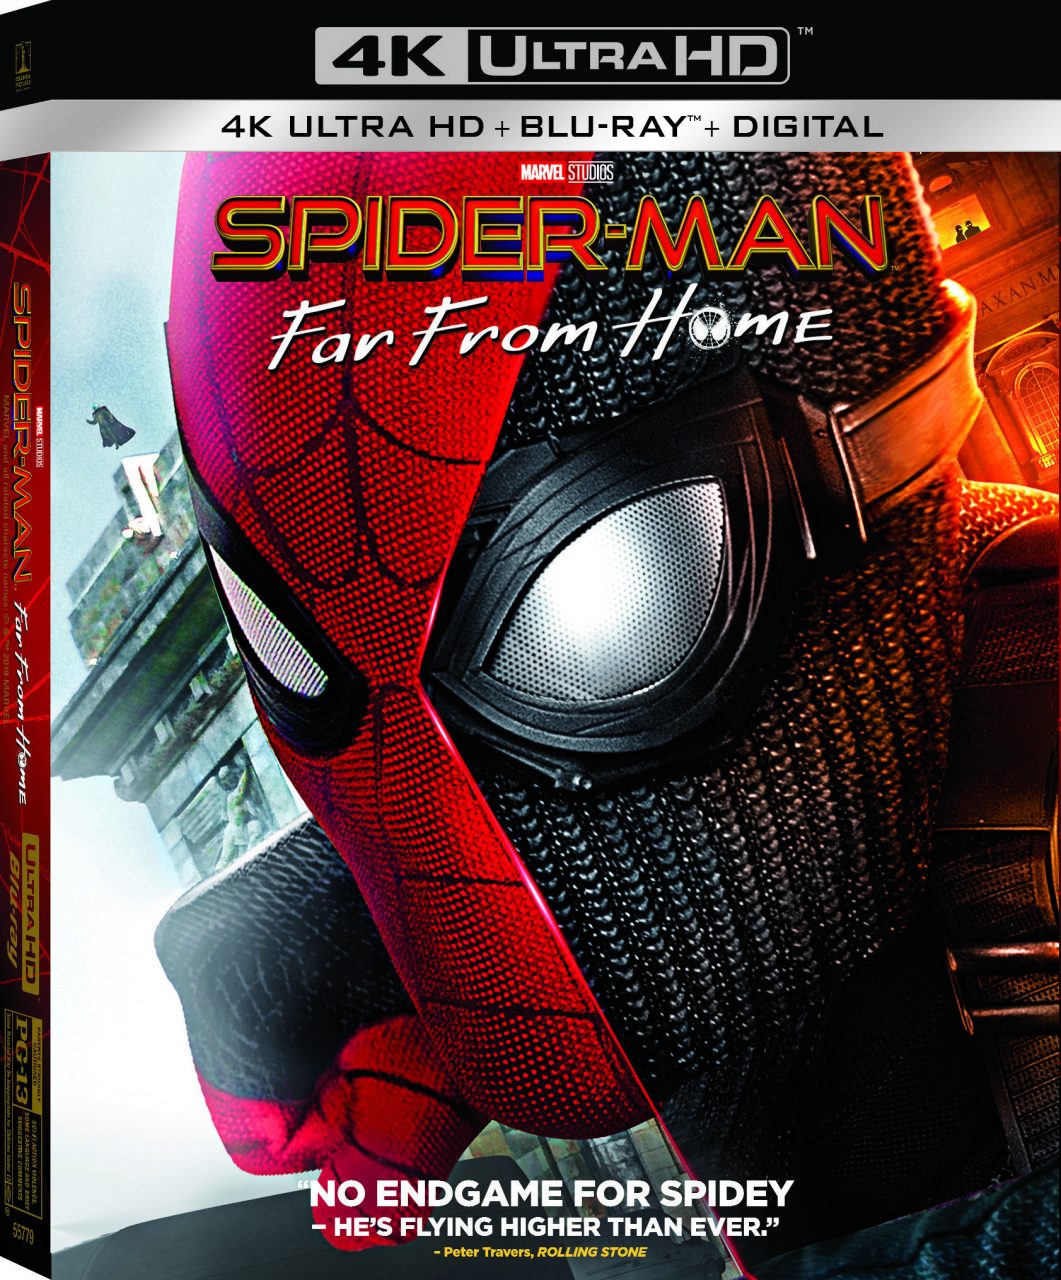 Spider-Man: Far From Home 4K Ultra HD cover (Sony Pictures Home Entertainment)